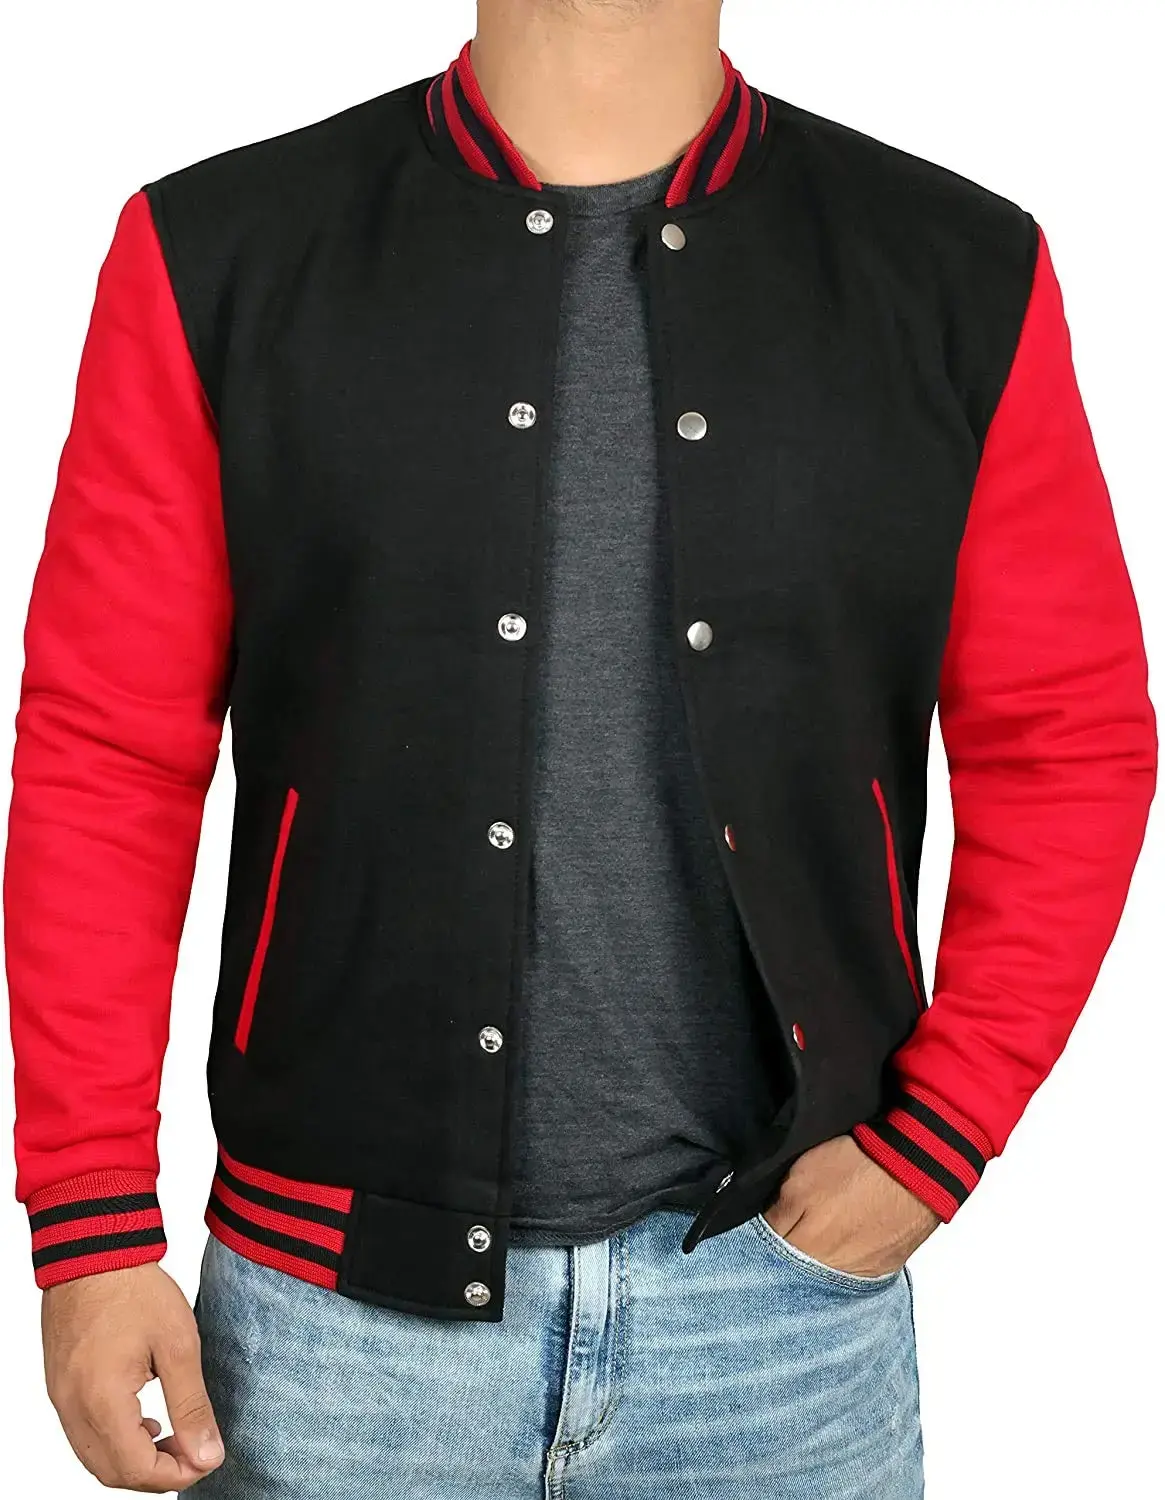 black-red-quilted-varsity-jacket-for-mens (2)